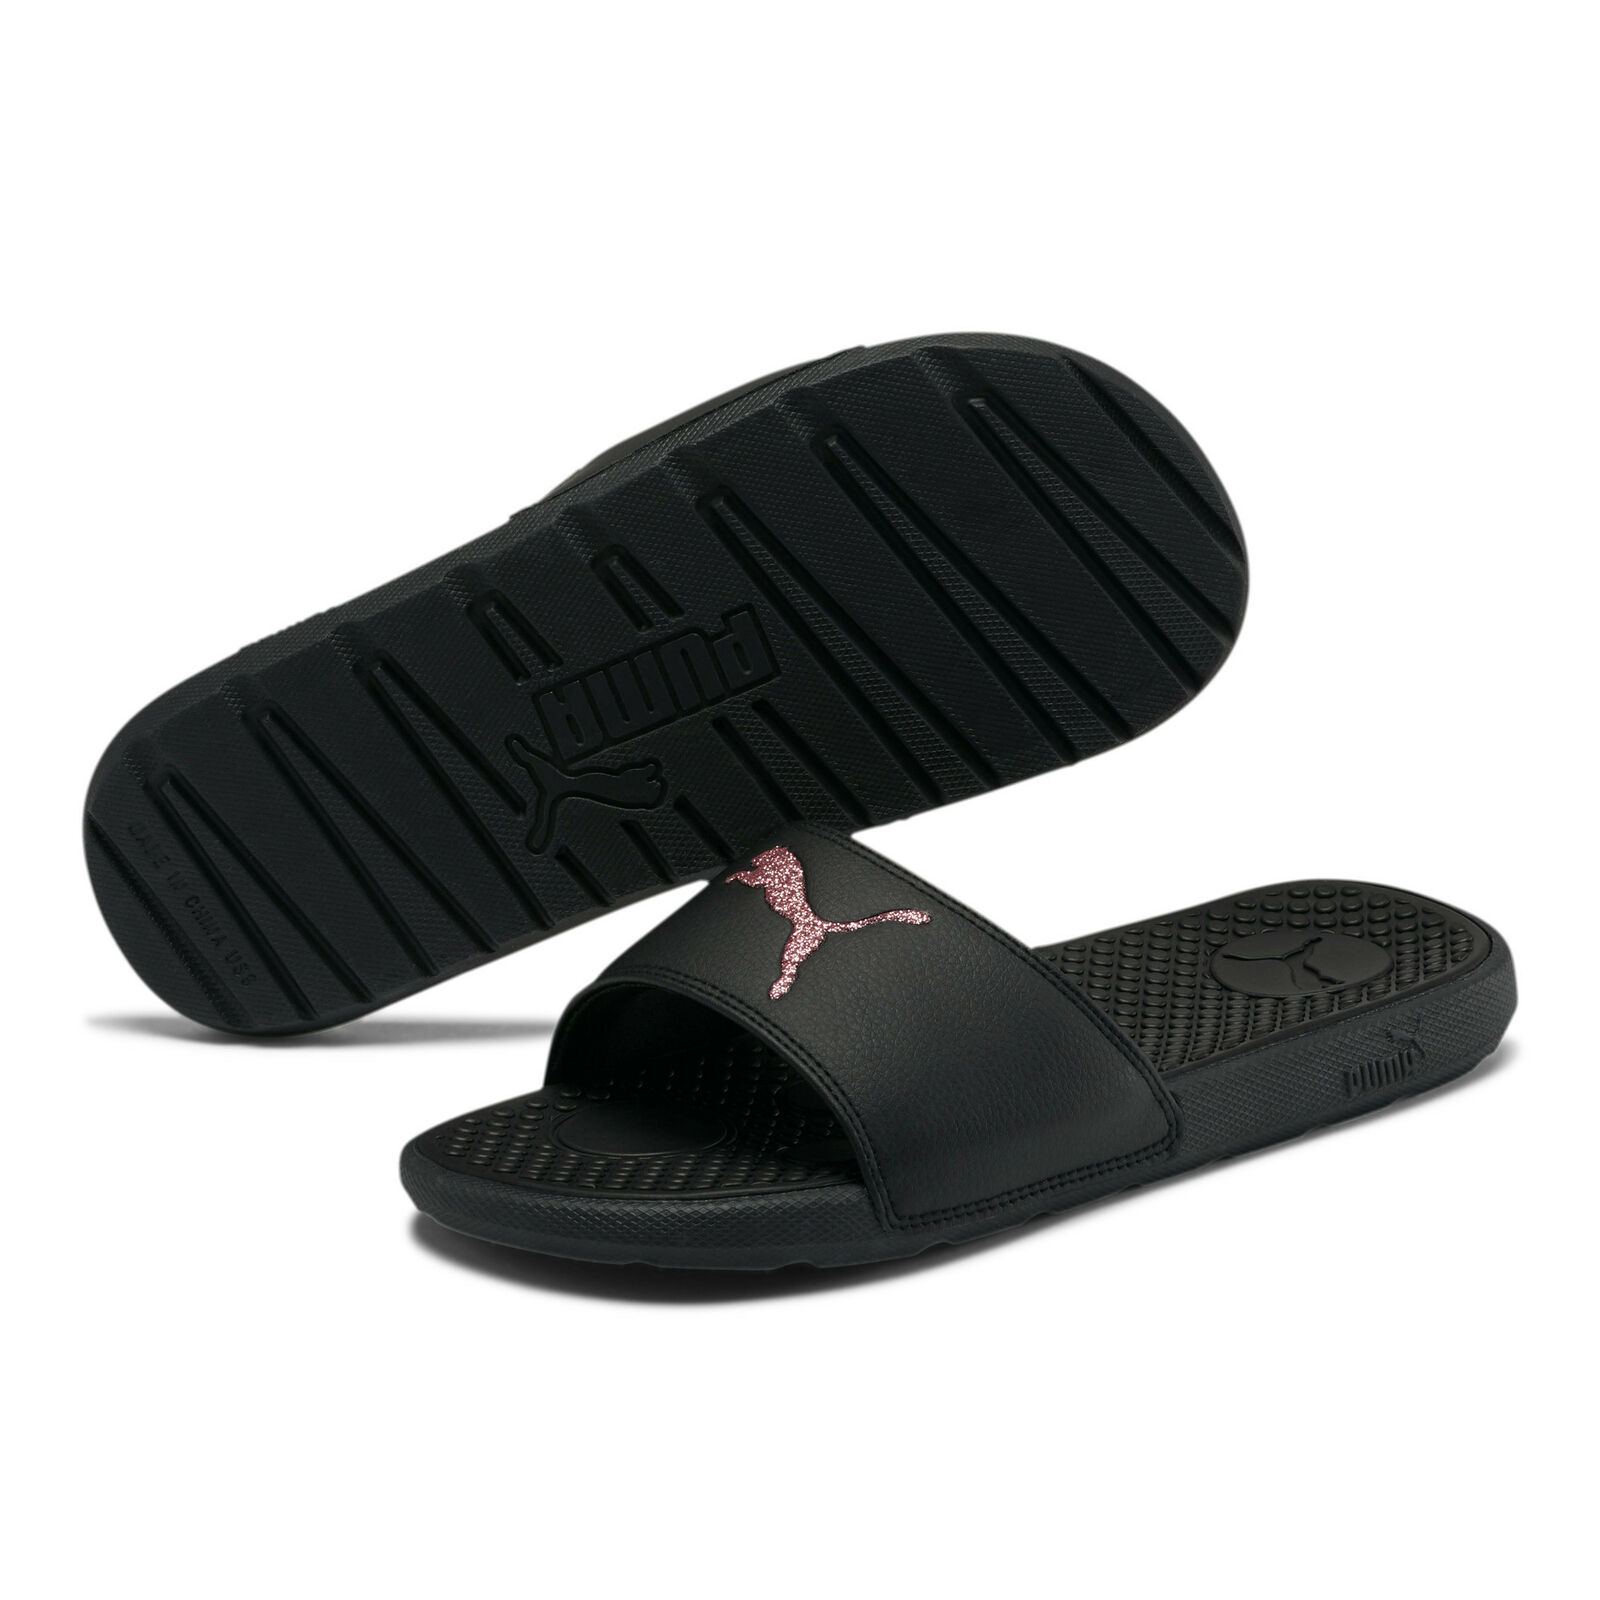 puma slippers for womens amazon